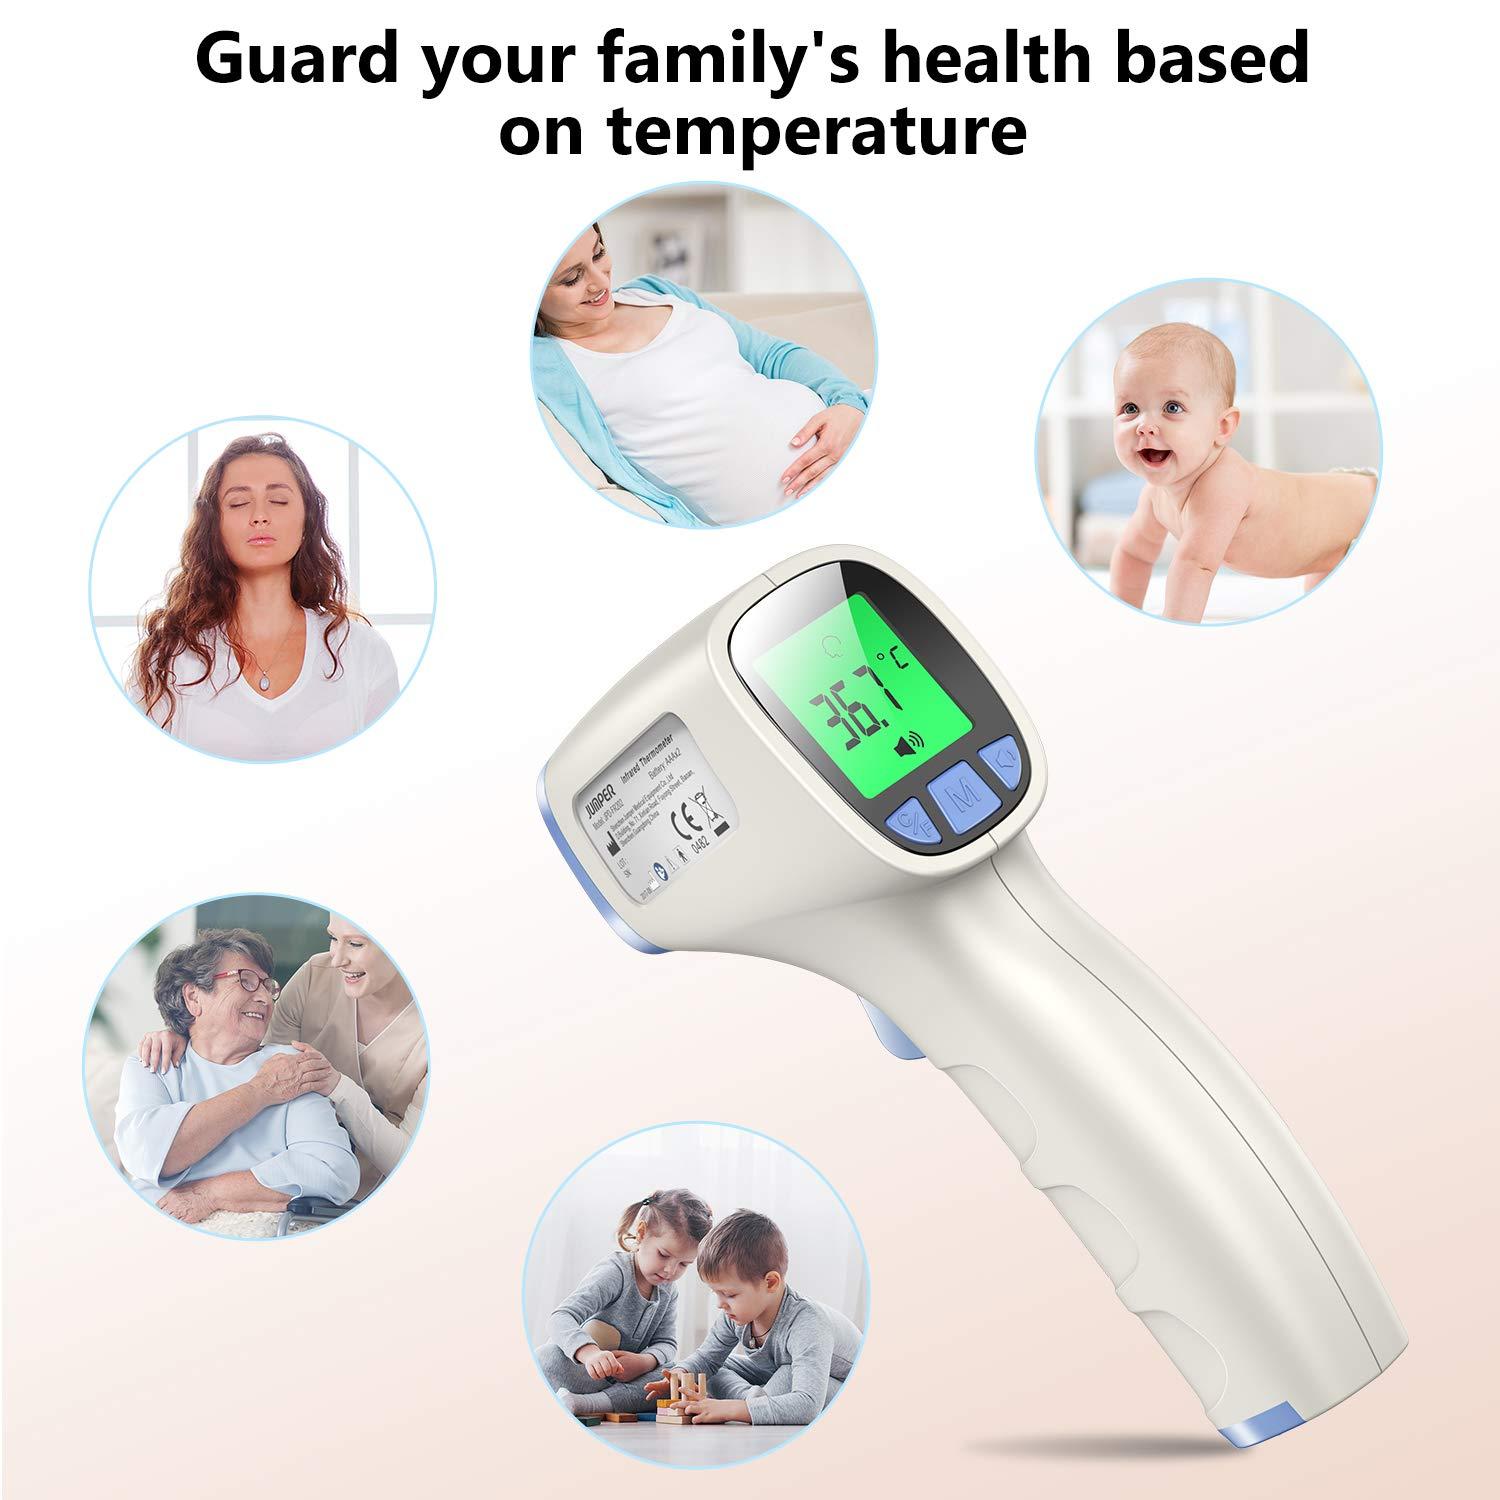 Jumper Medical Forehead Thermometer, Non Contact Thermometer for Forehead  and Object Surface Measurement with Instant Reading and Fever Warning for